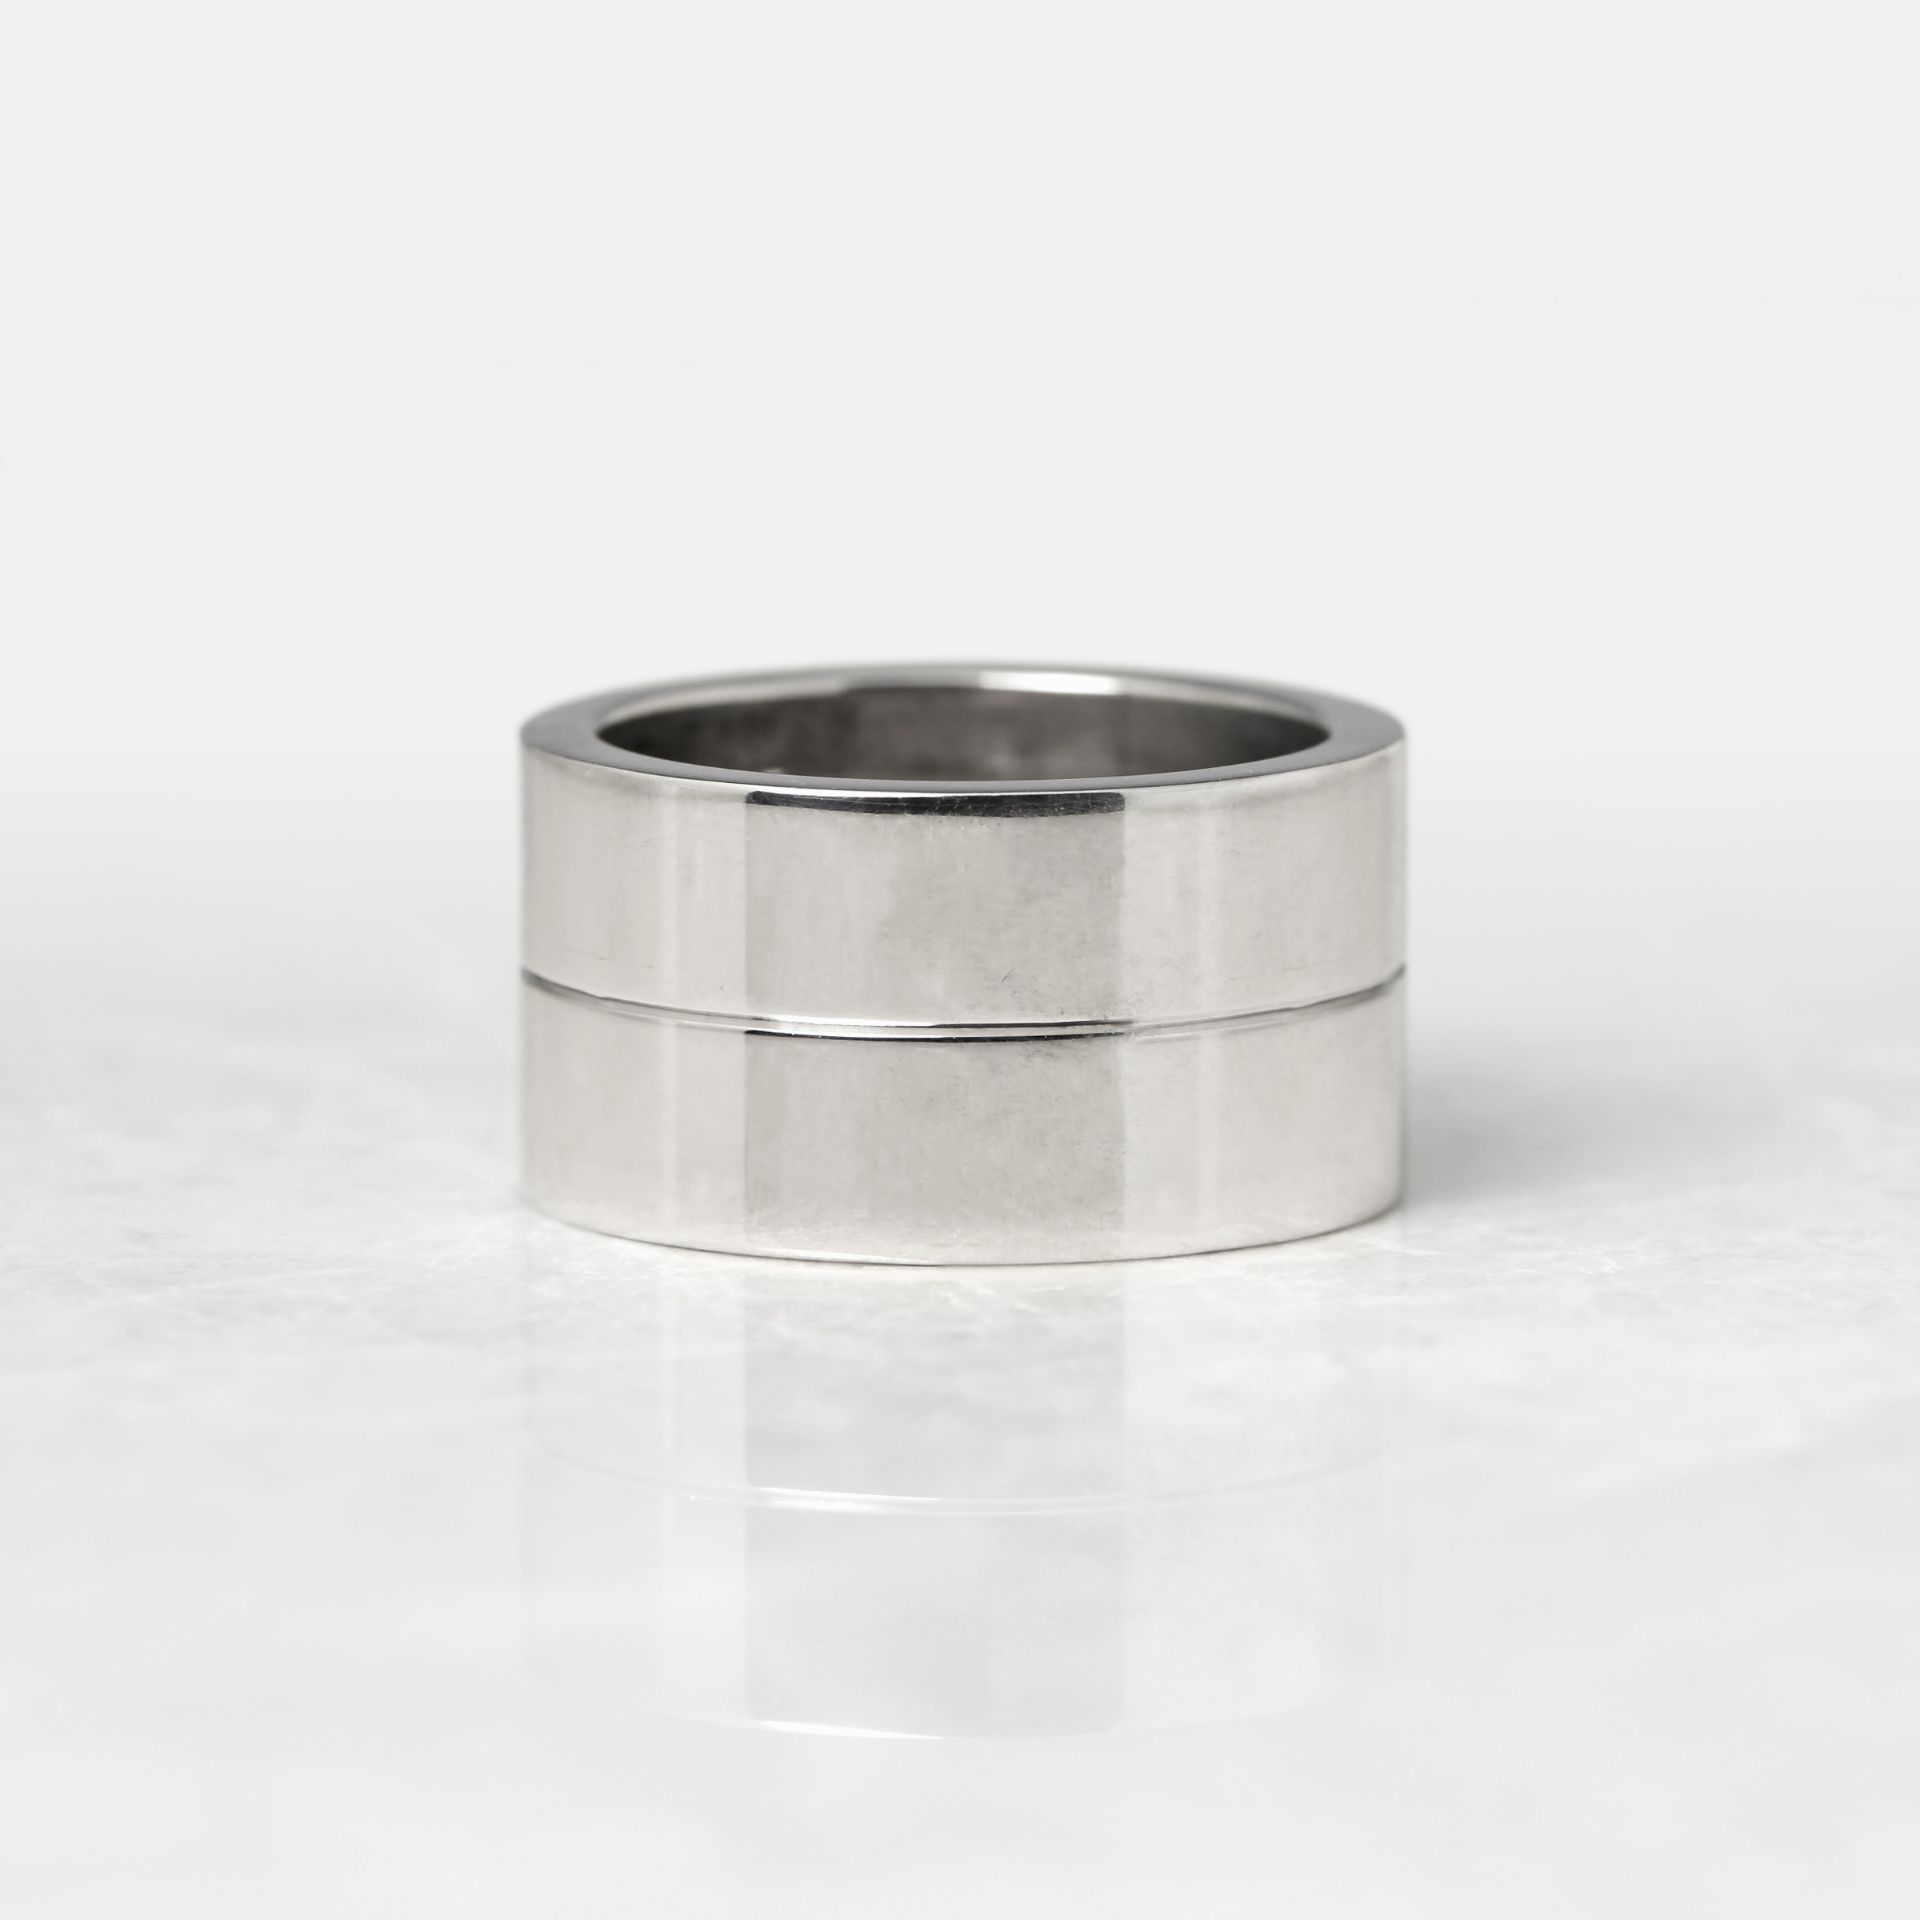 Cartier 18k White Gold High Love Ring - Image 3 of 7